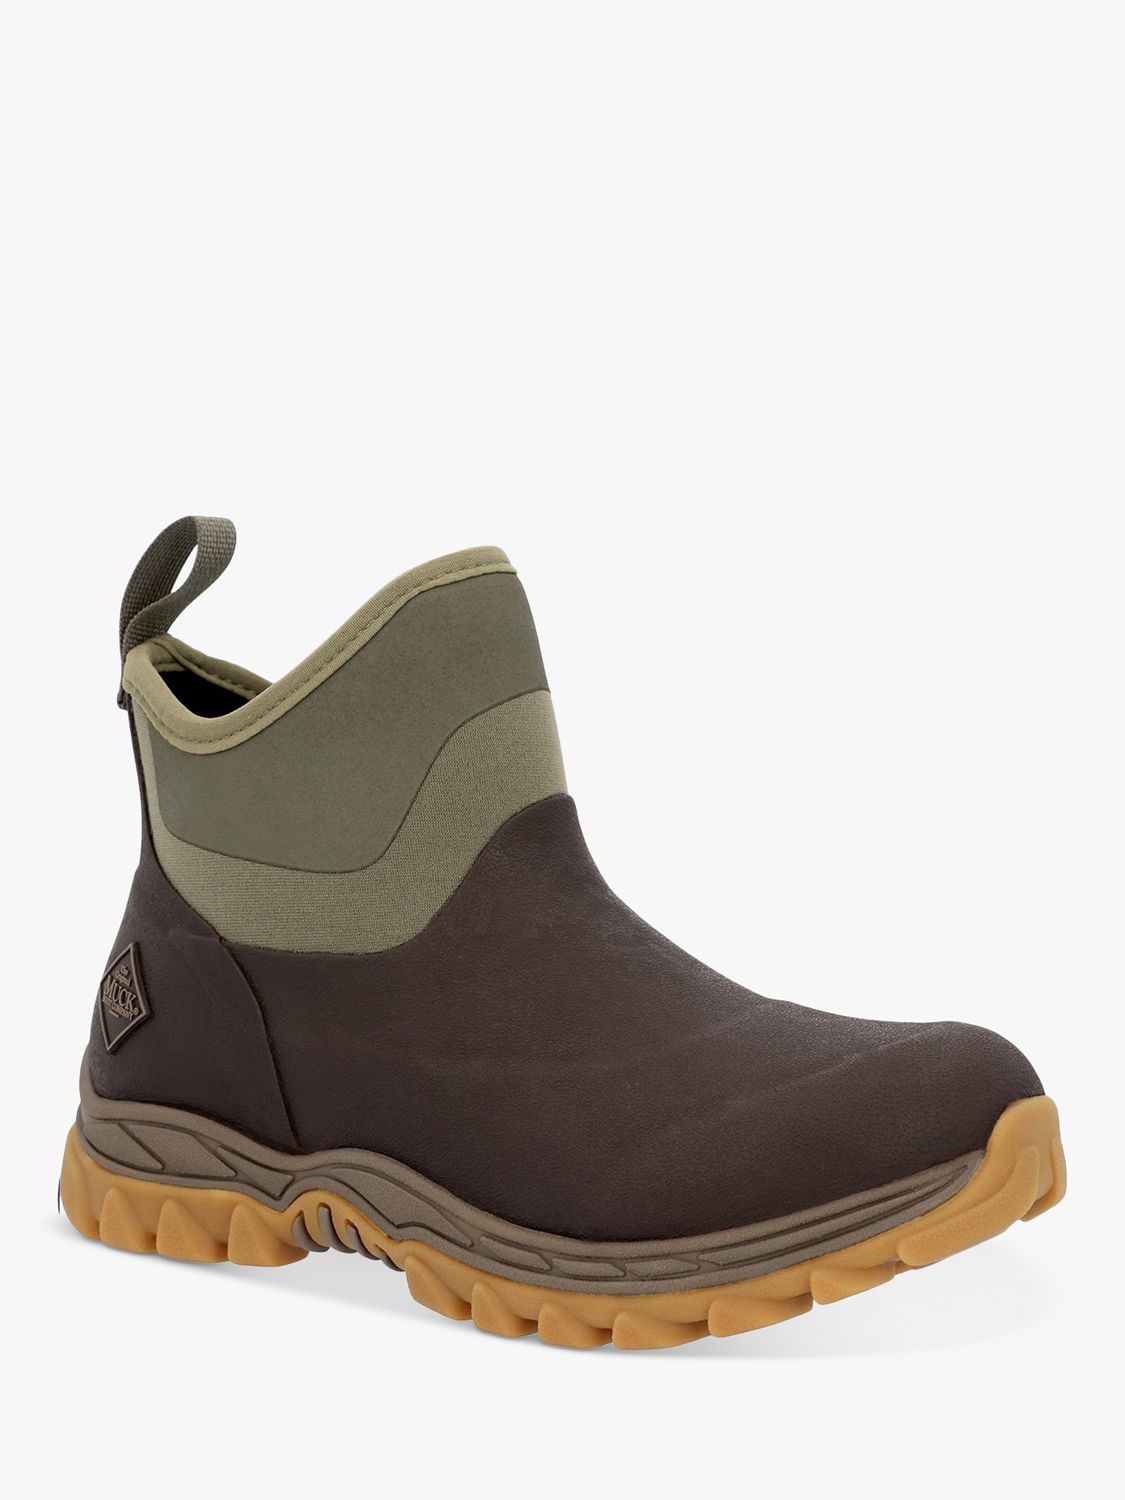 Muck Arctic Sport II Ankle Boots, Dark Brown/Olive at John Lewis & Partners